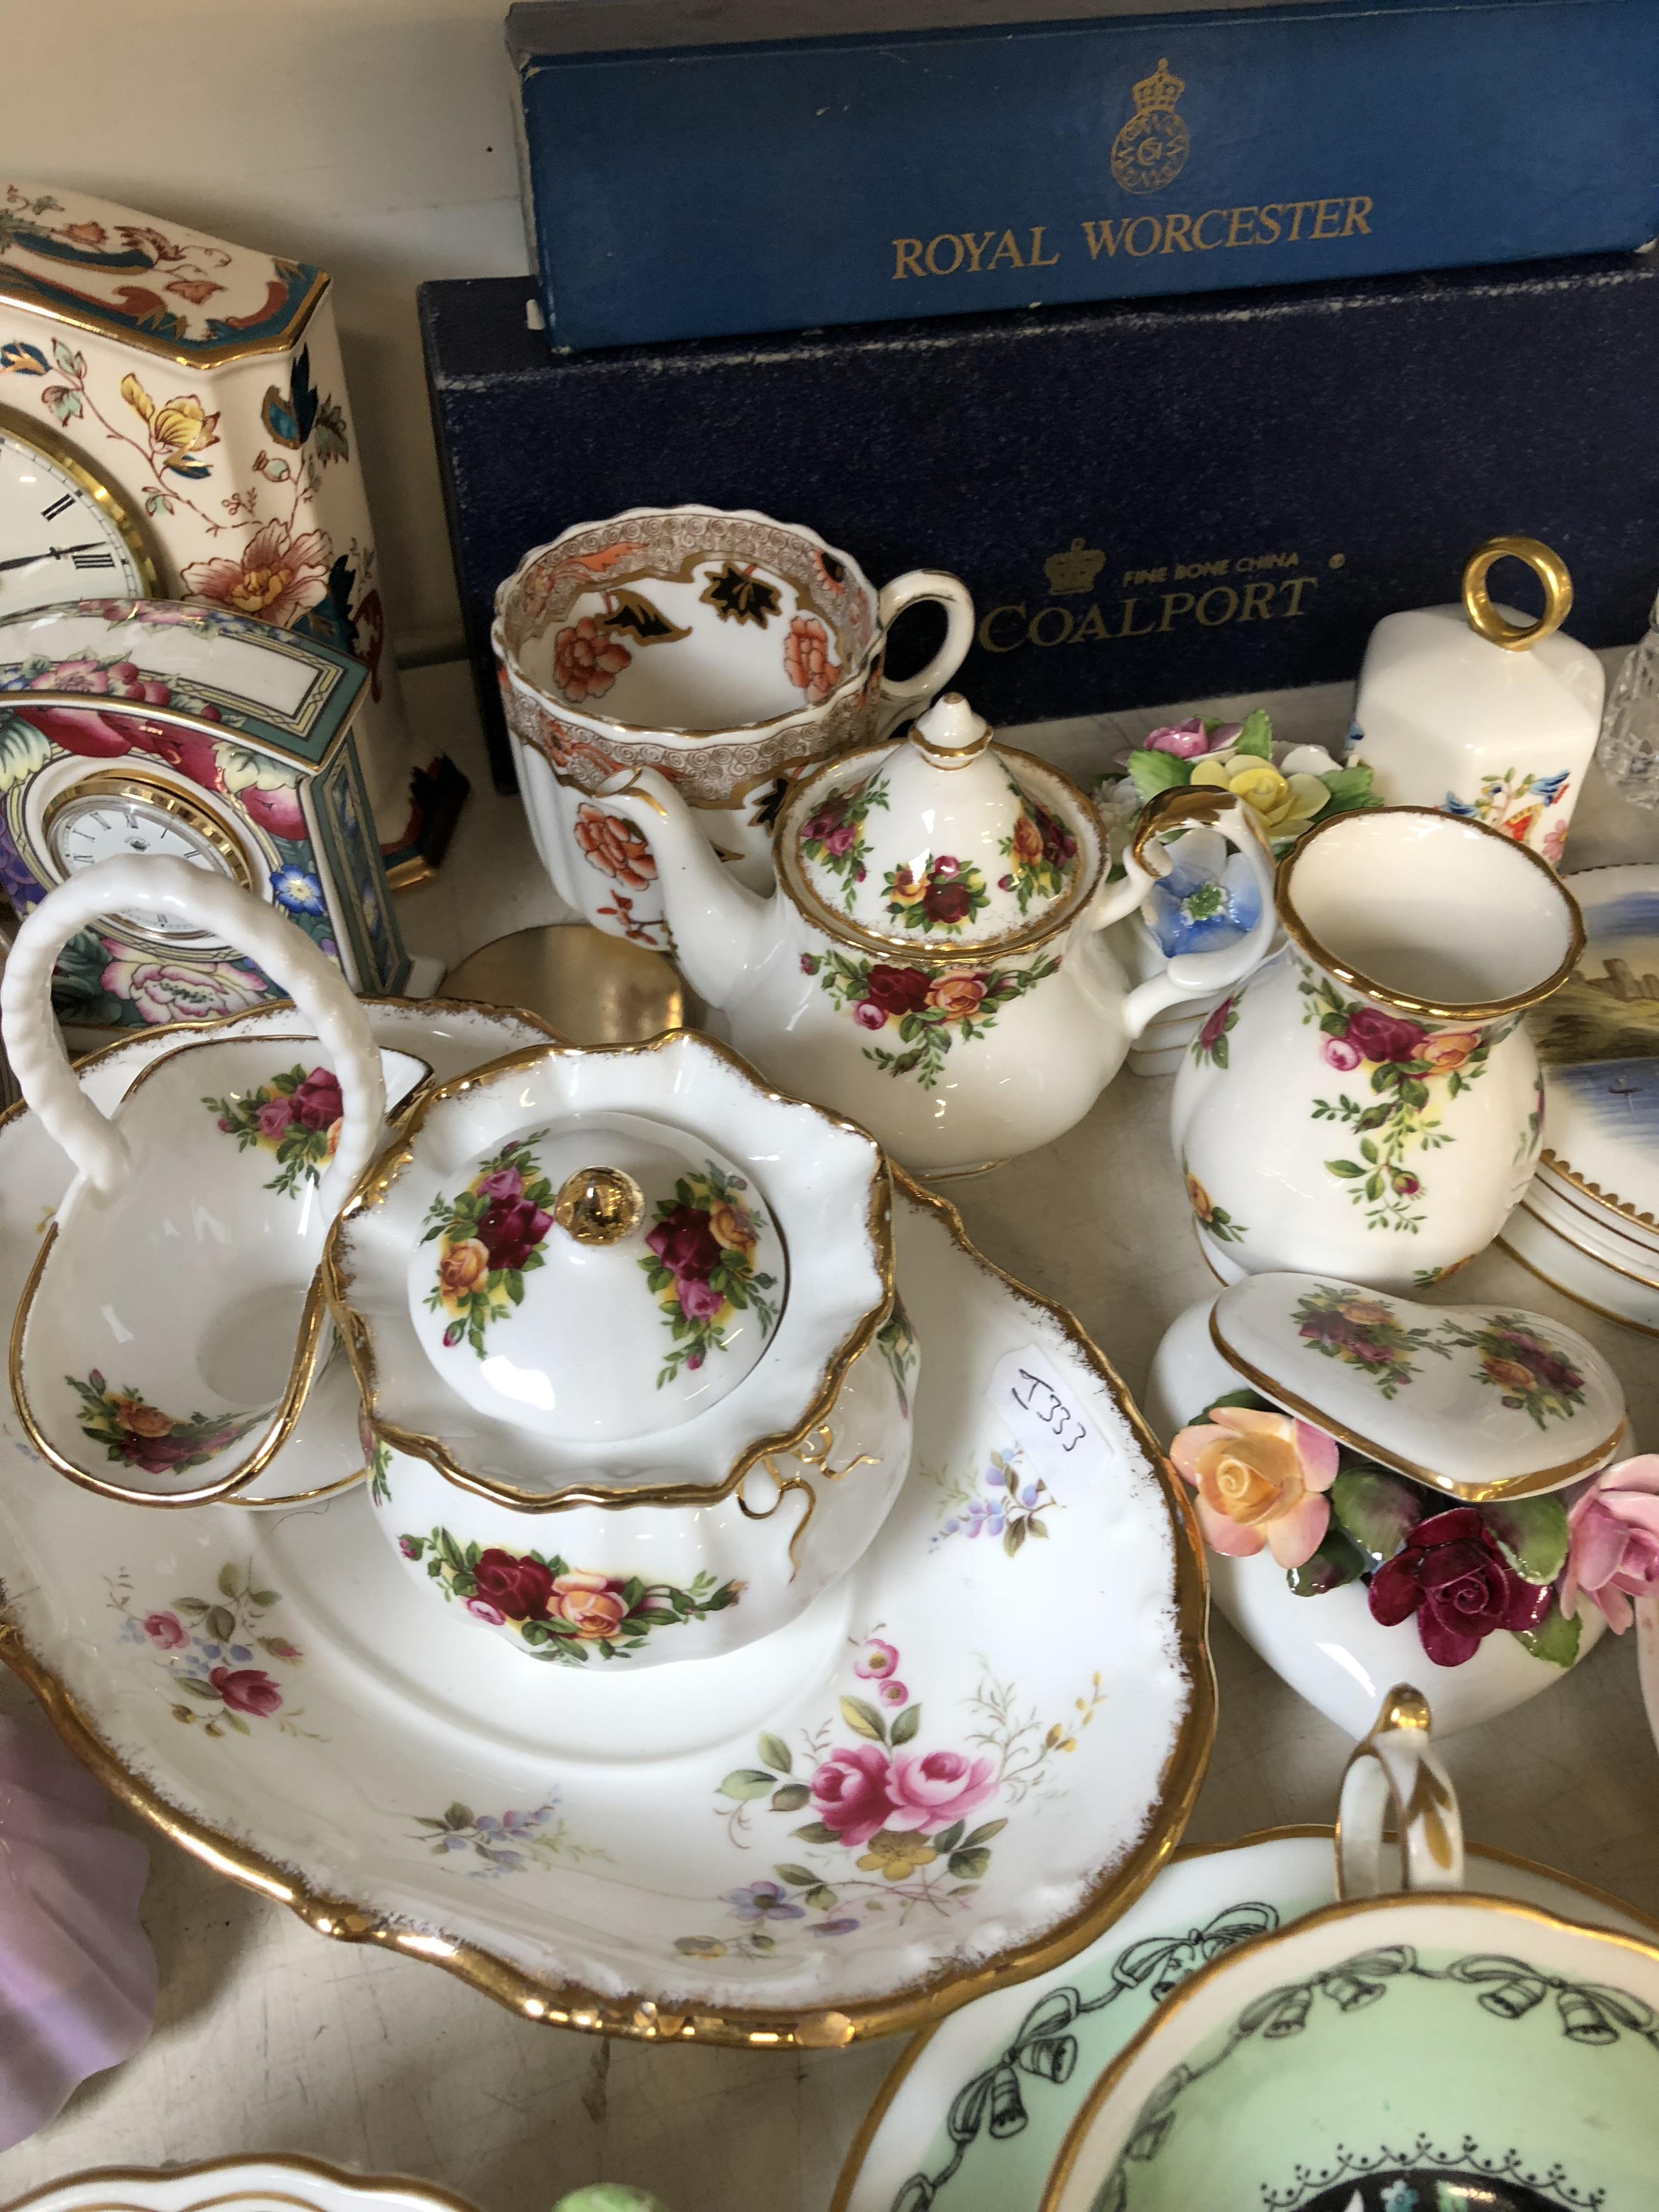 VARIOUS CHINA CUPS ND SAUCERS AND OTHER PORCELAIN - Image 10 of 21